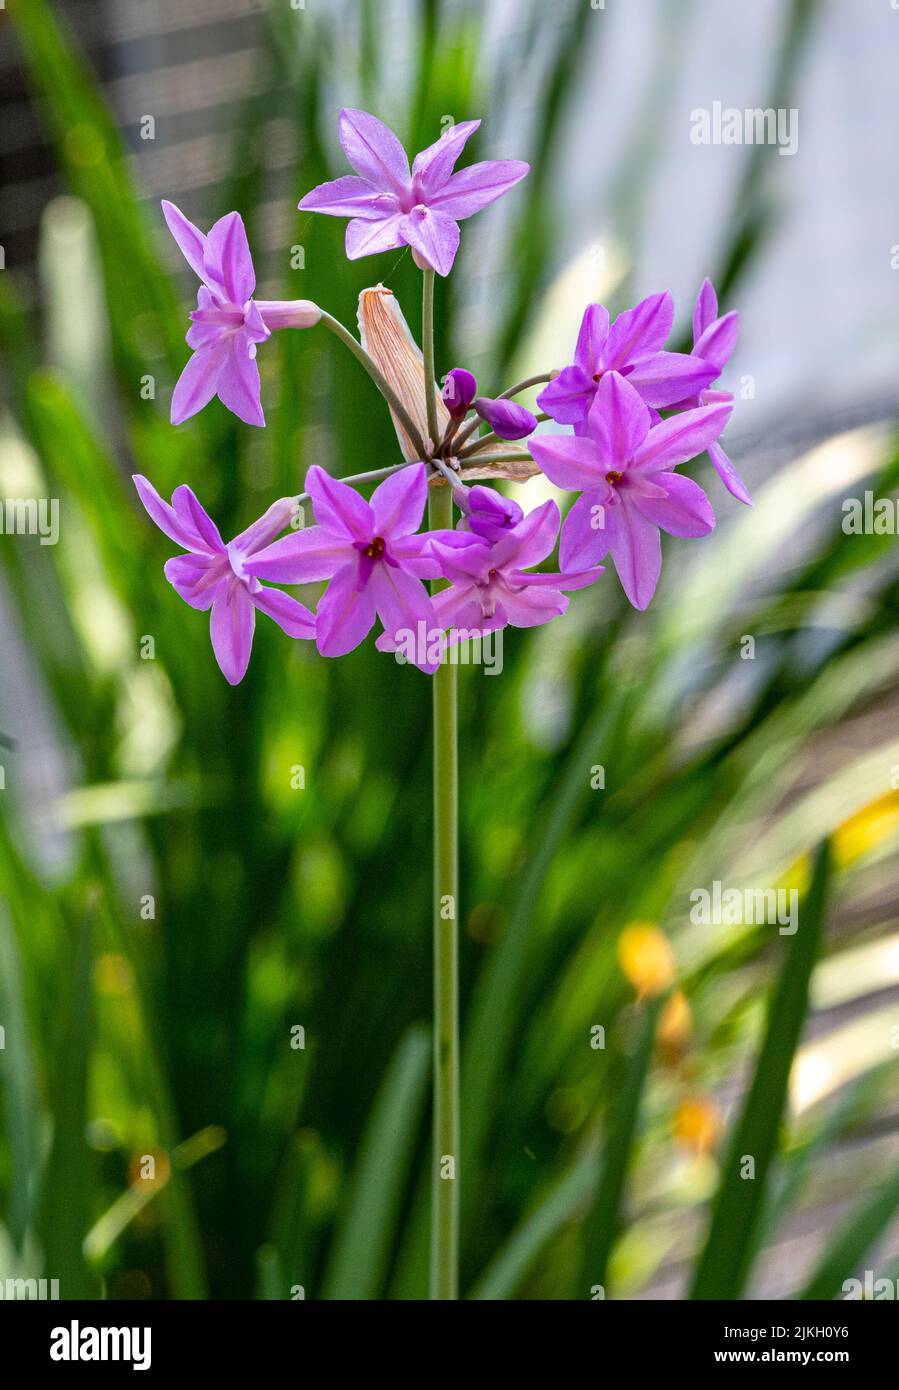 Close up of violet society garlic (tulbaghia violacea) in bloom Stock Photo